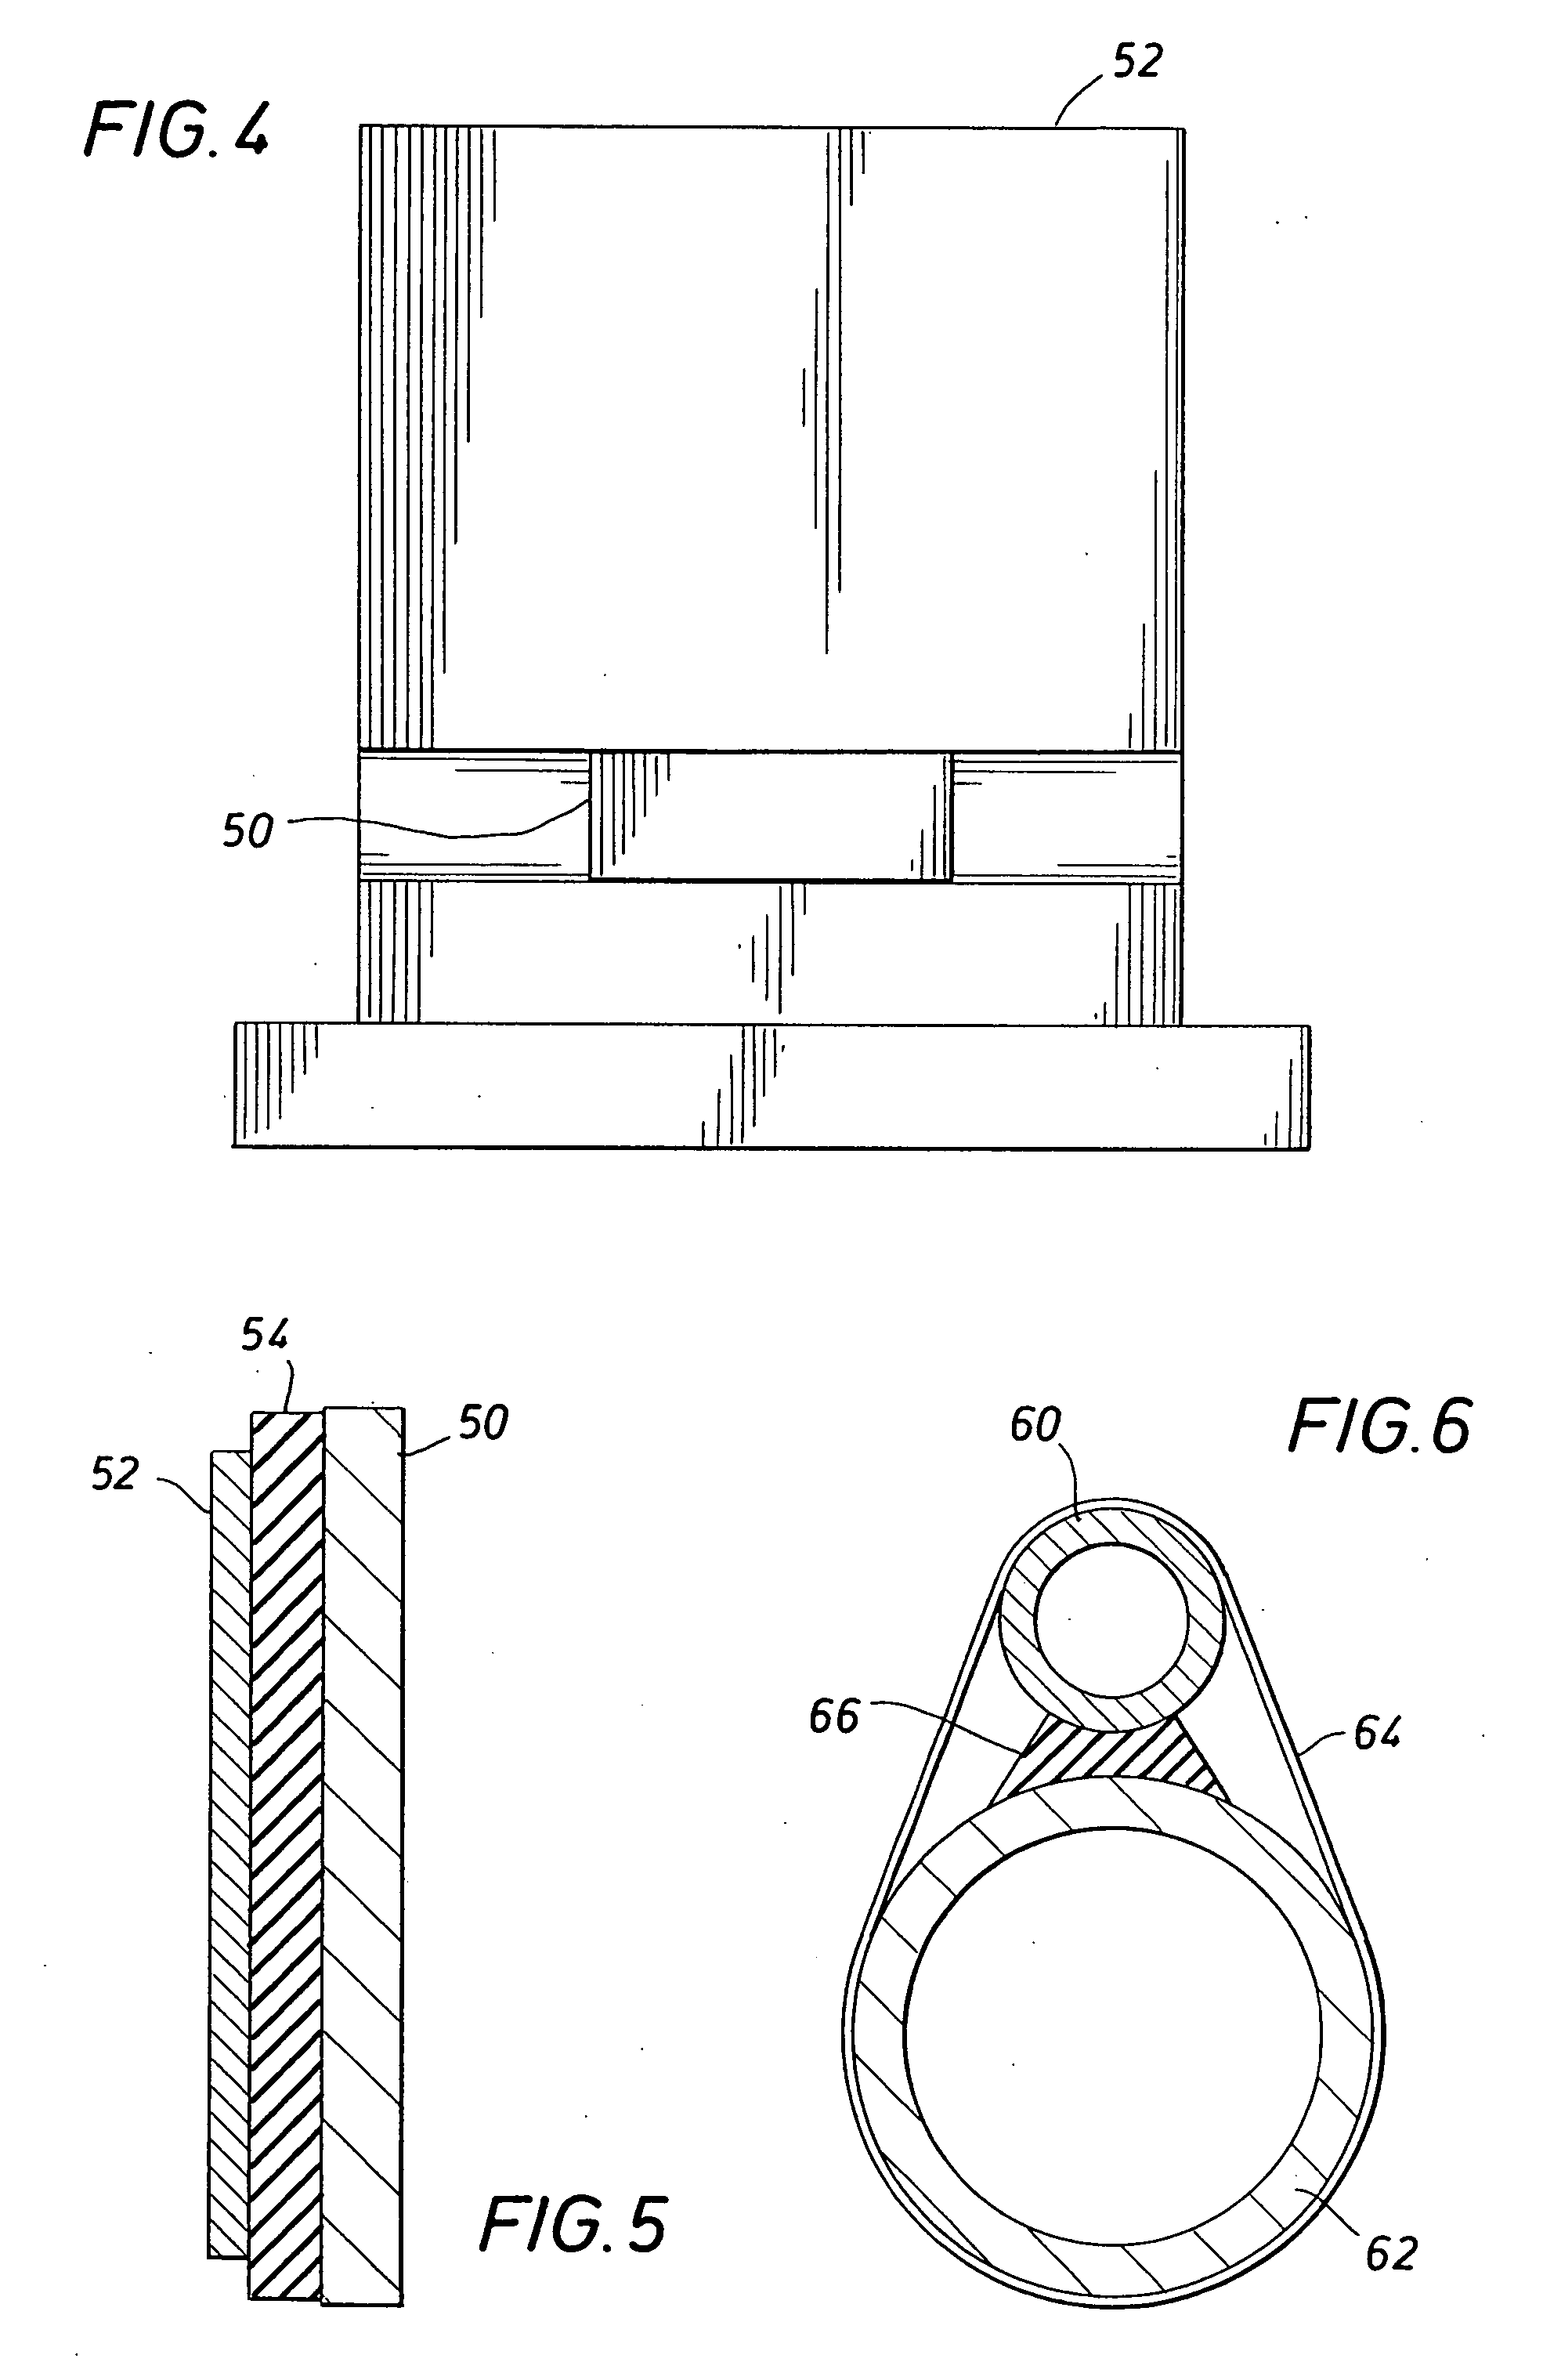 Thermally-conductive, electrically non-conductive heat transfer material and articles made thereof